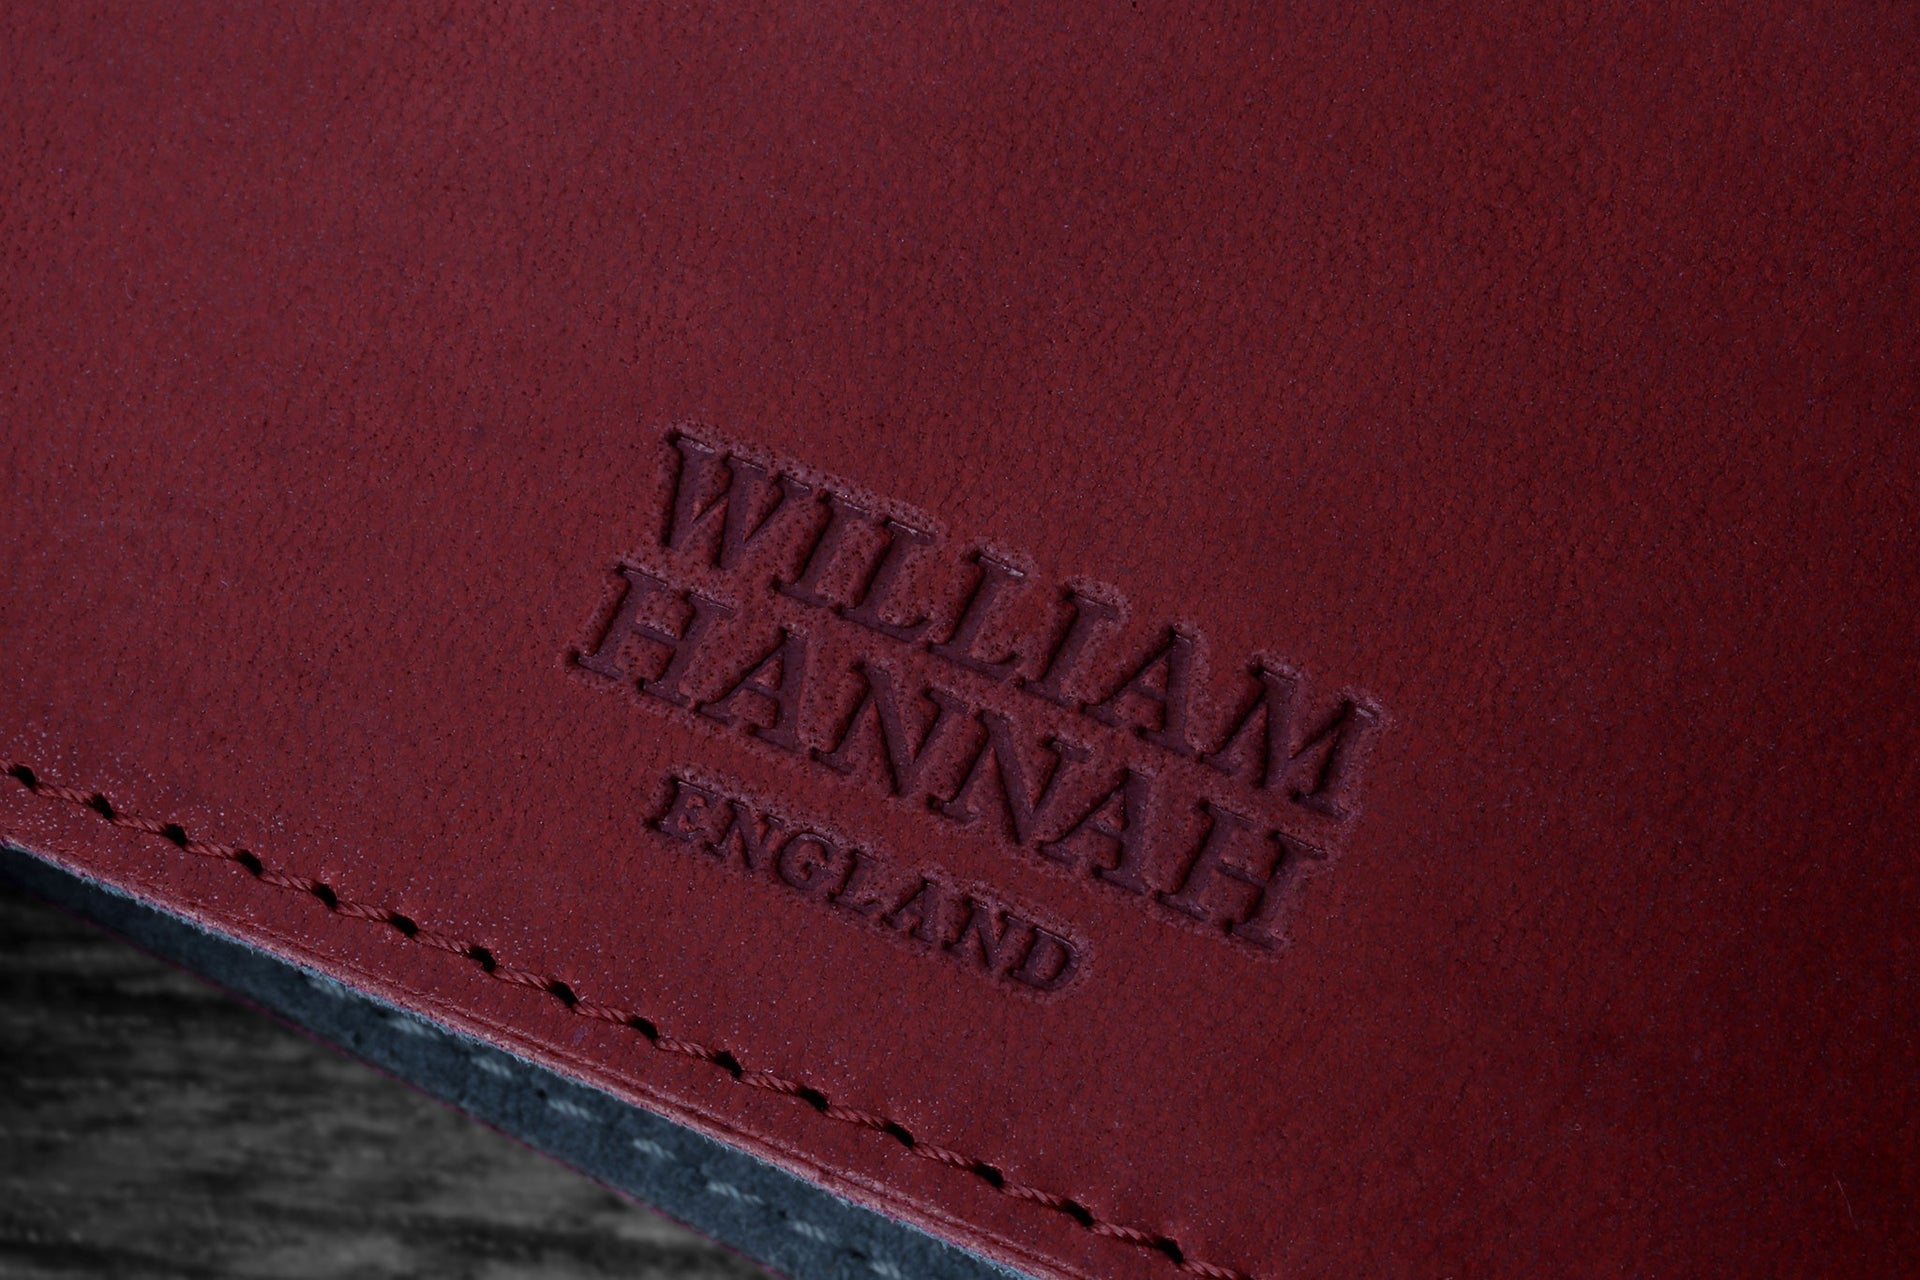 Luxury A5 Leather Notebooks - William Hannah Limited